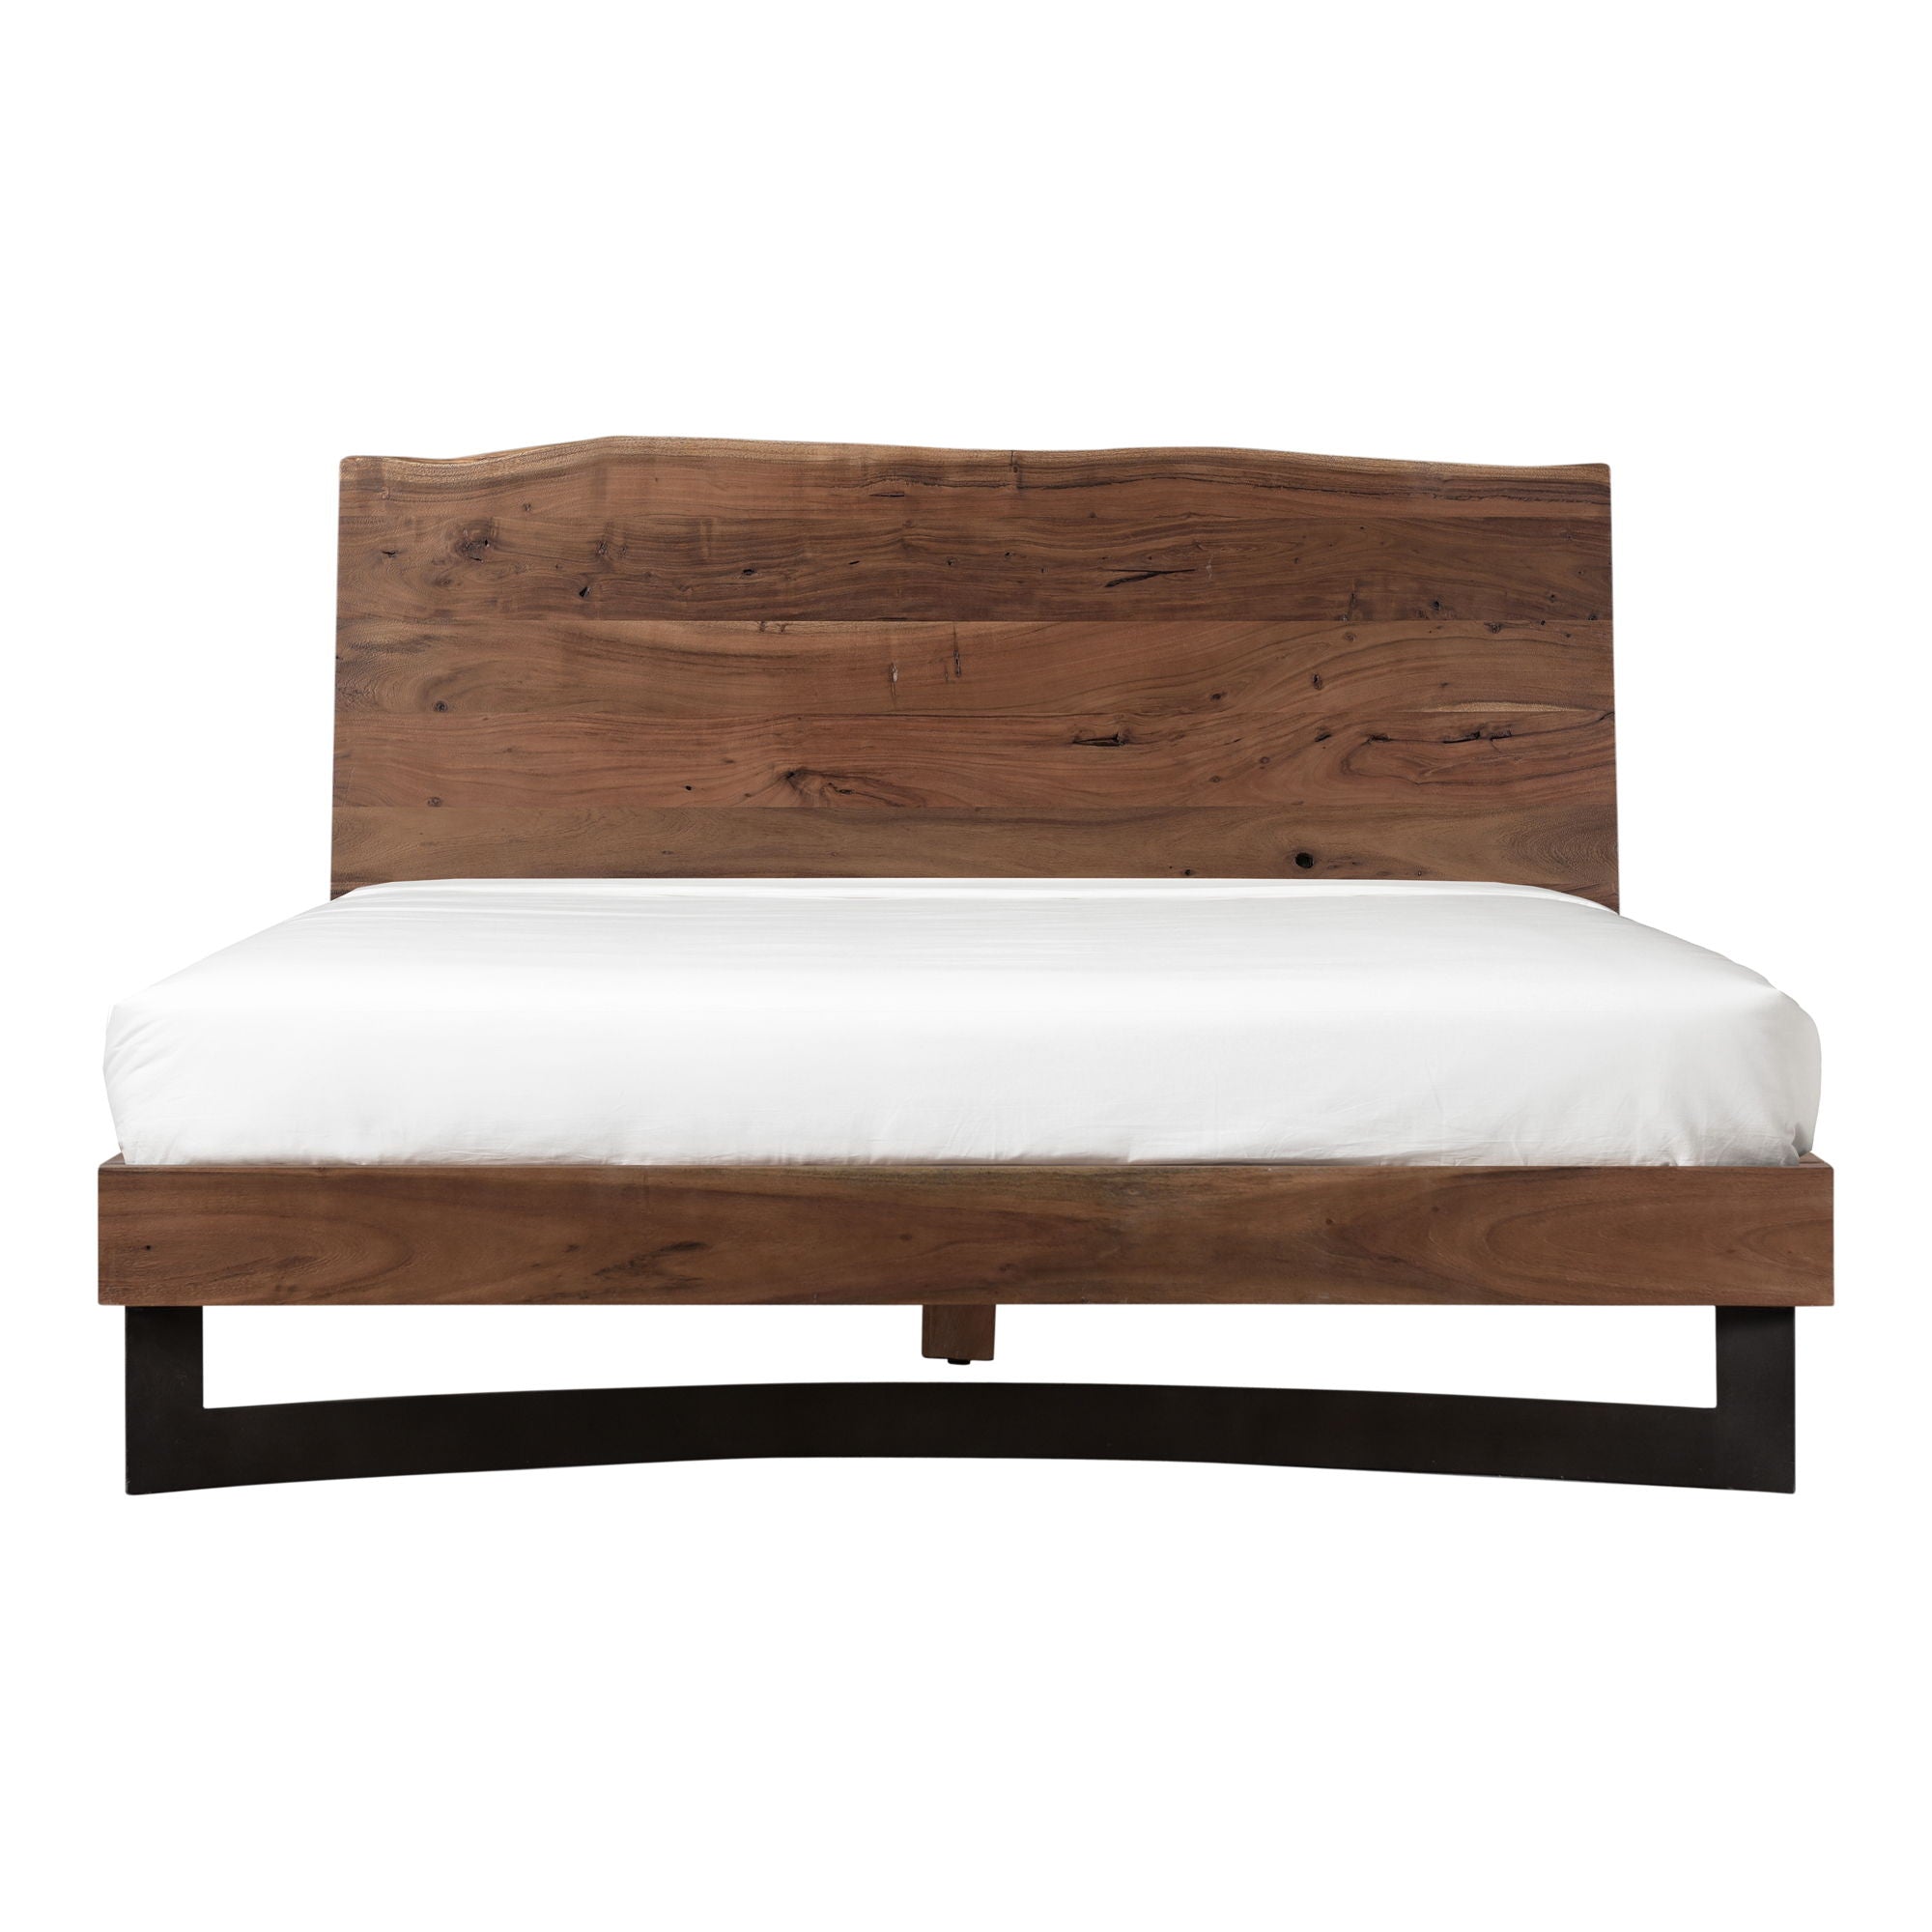 Bent - Queen Size Bed - Natural Stain